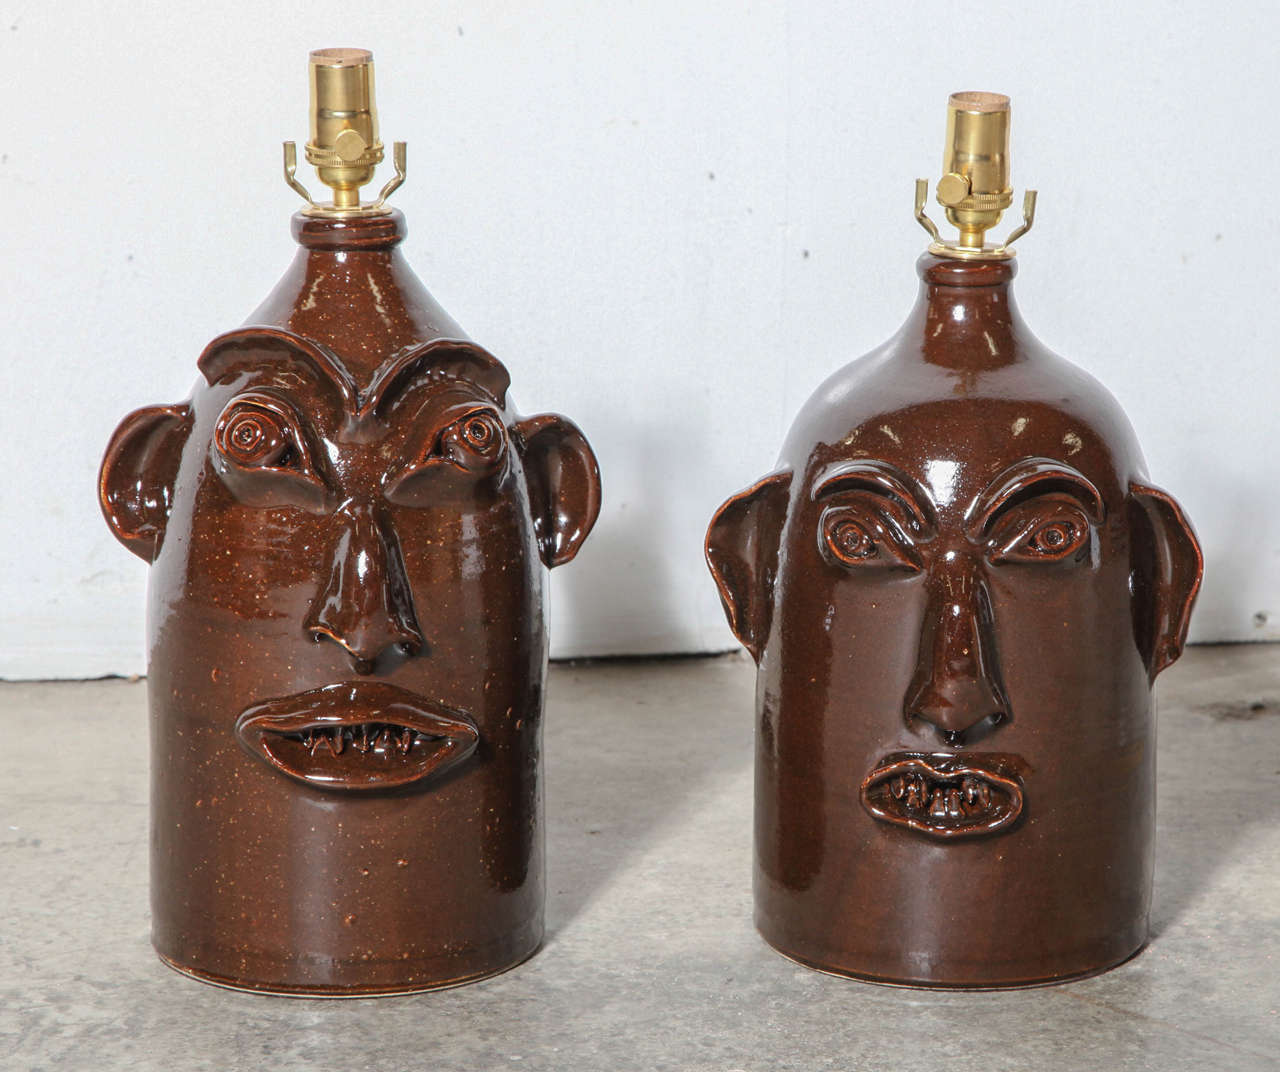 A pair of hand-thrown jug lamps with hand-detailed facial features added. Kiln fired, lead-free glaze. Height includes lamping.